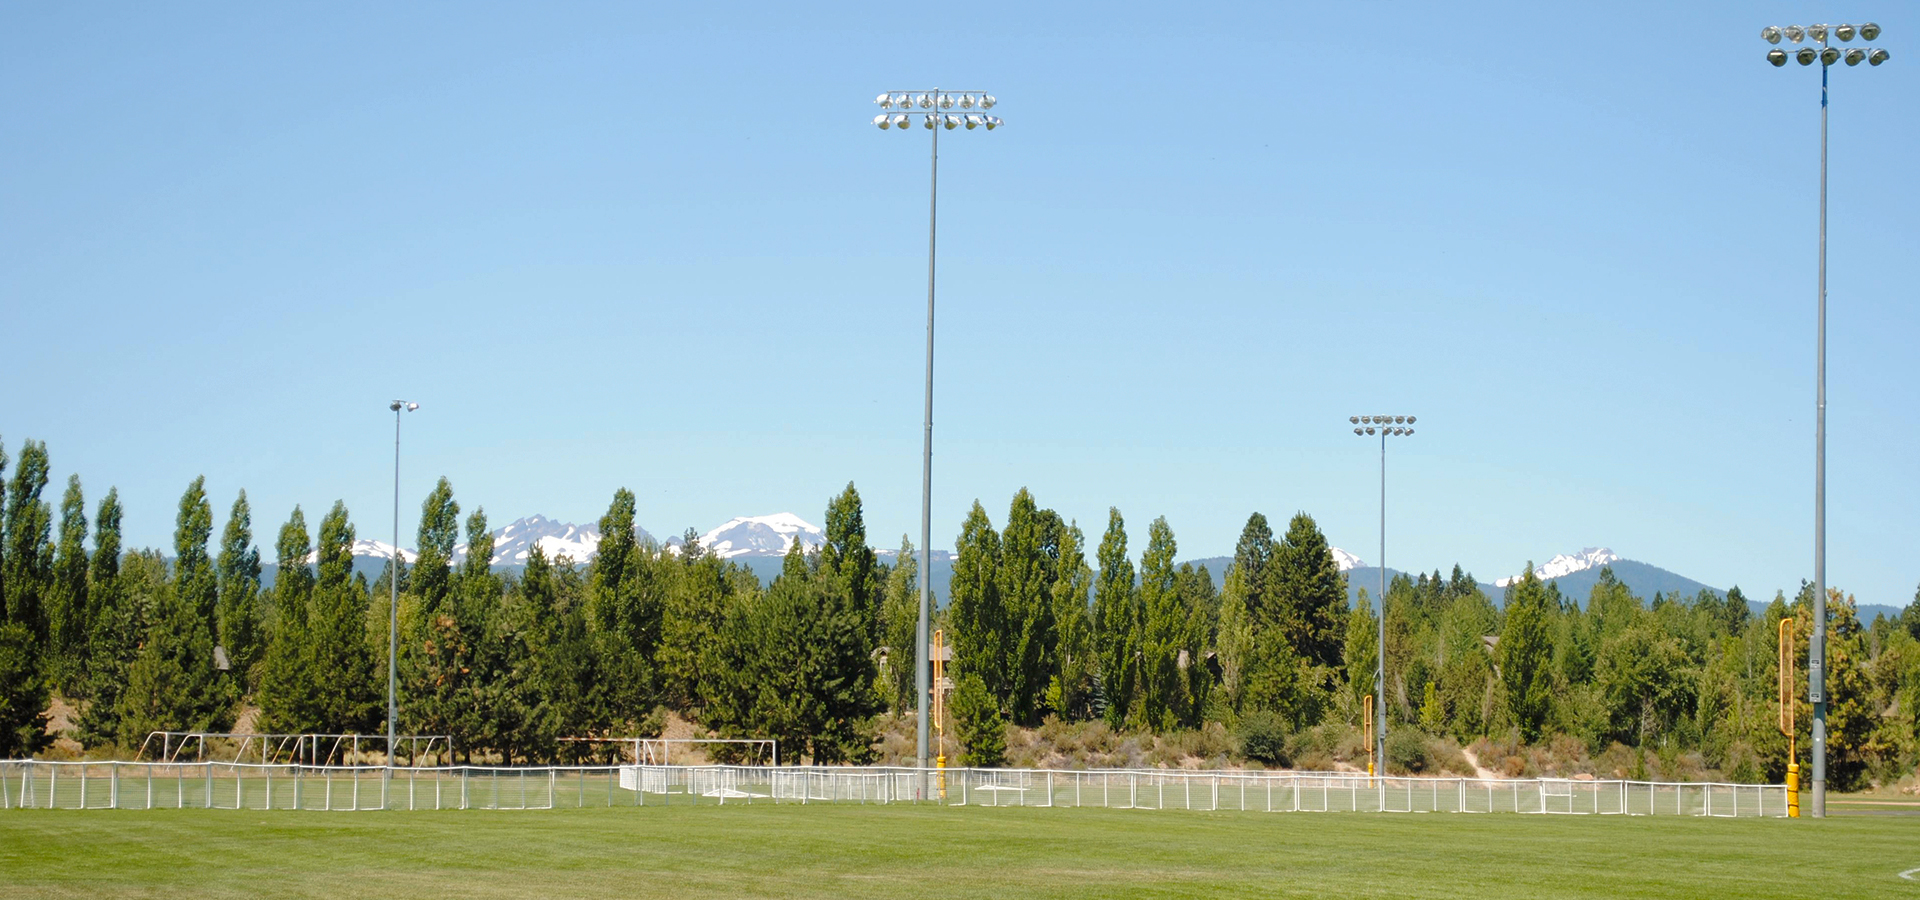 Mountain views and the athletic fields at Skyline Park.